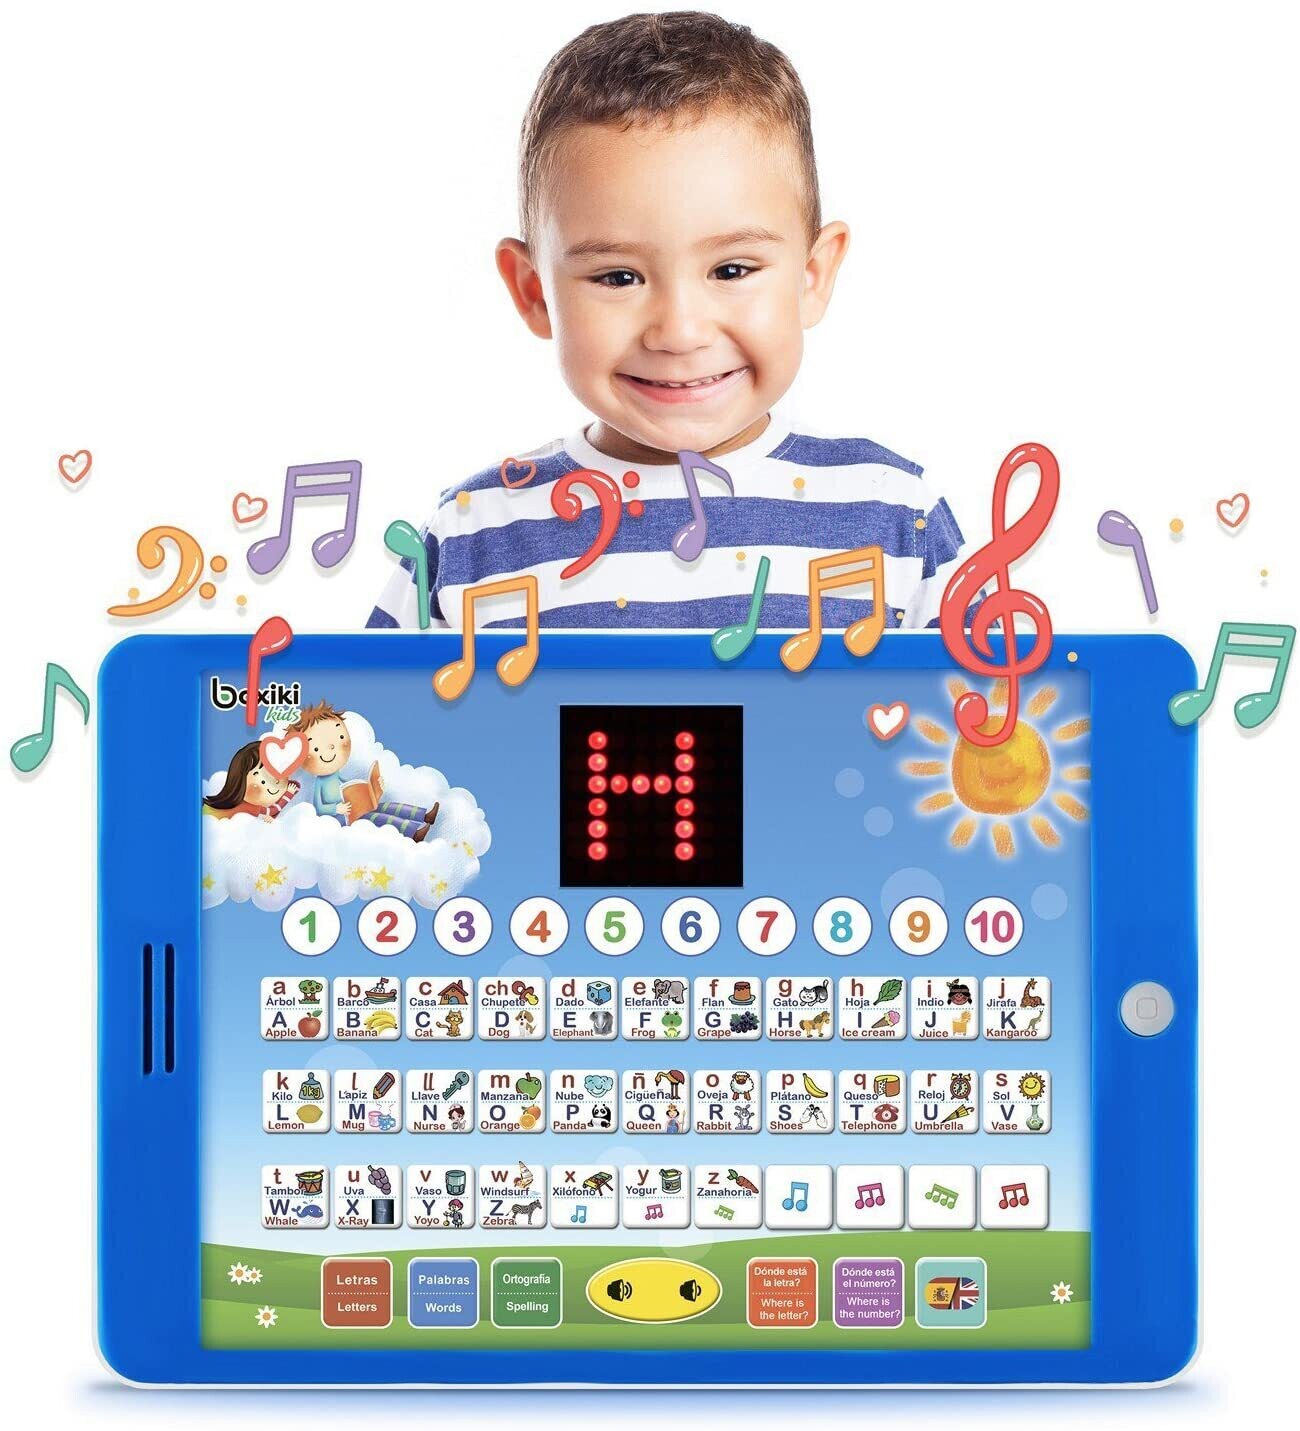 Spanish-English Tablet Bilingual Educational Toy with LCD Screen